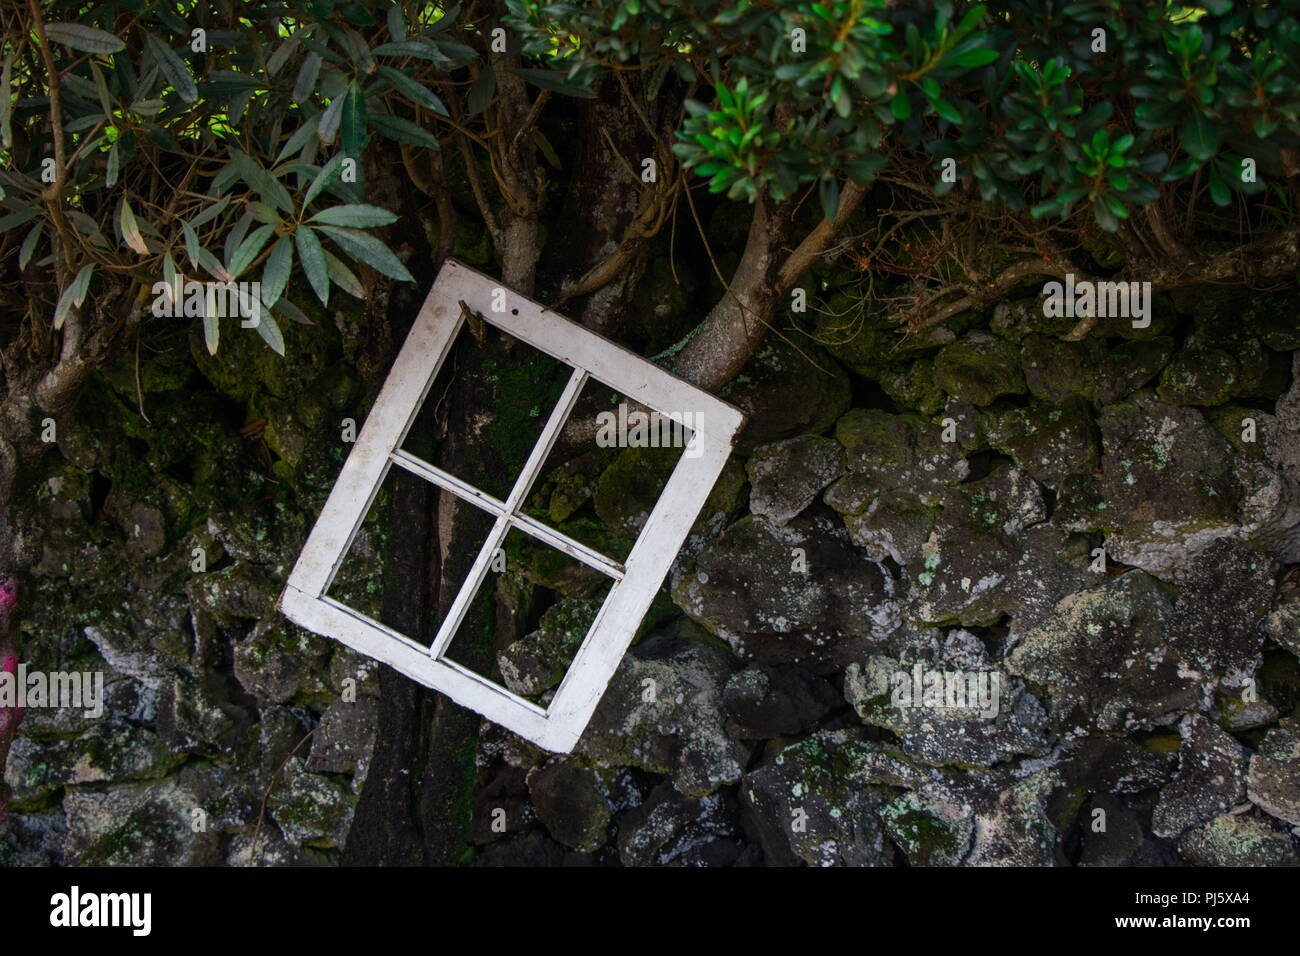 Lonely window hanging on a tree in the field Stock Photo